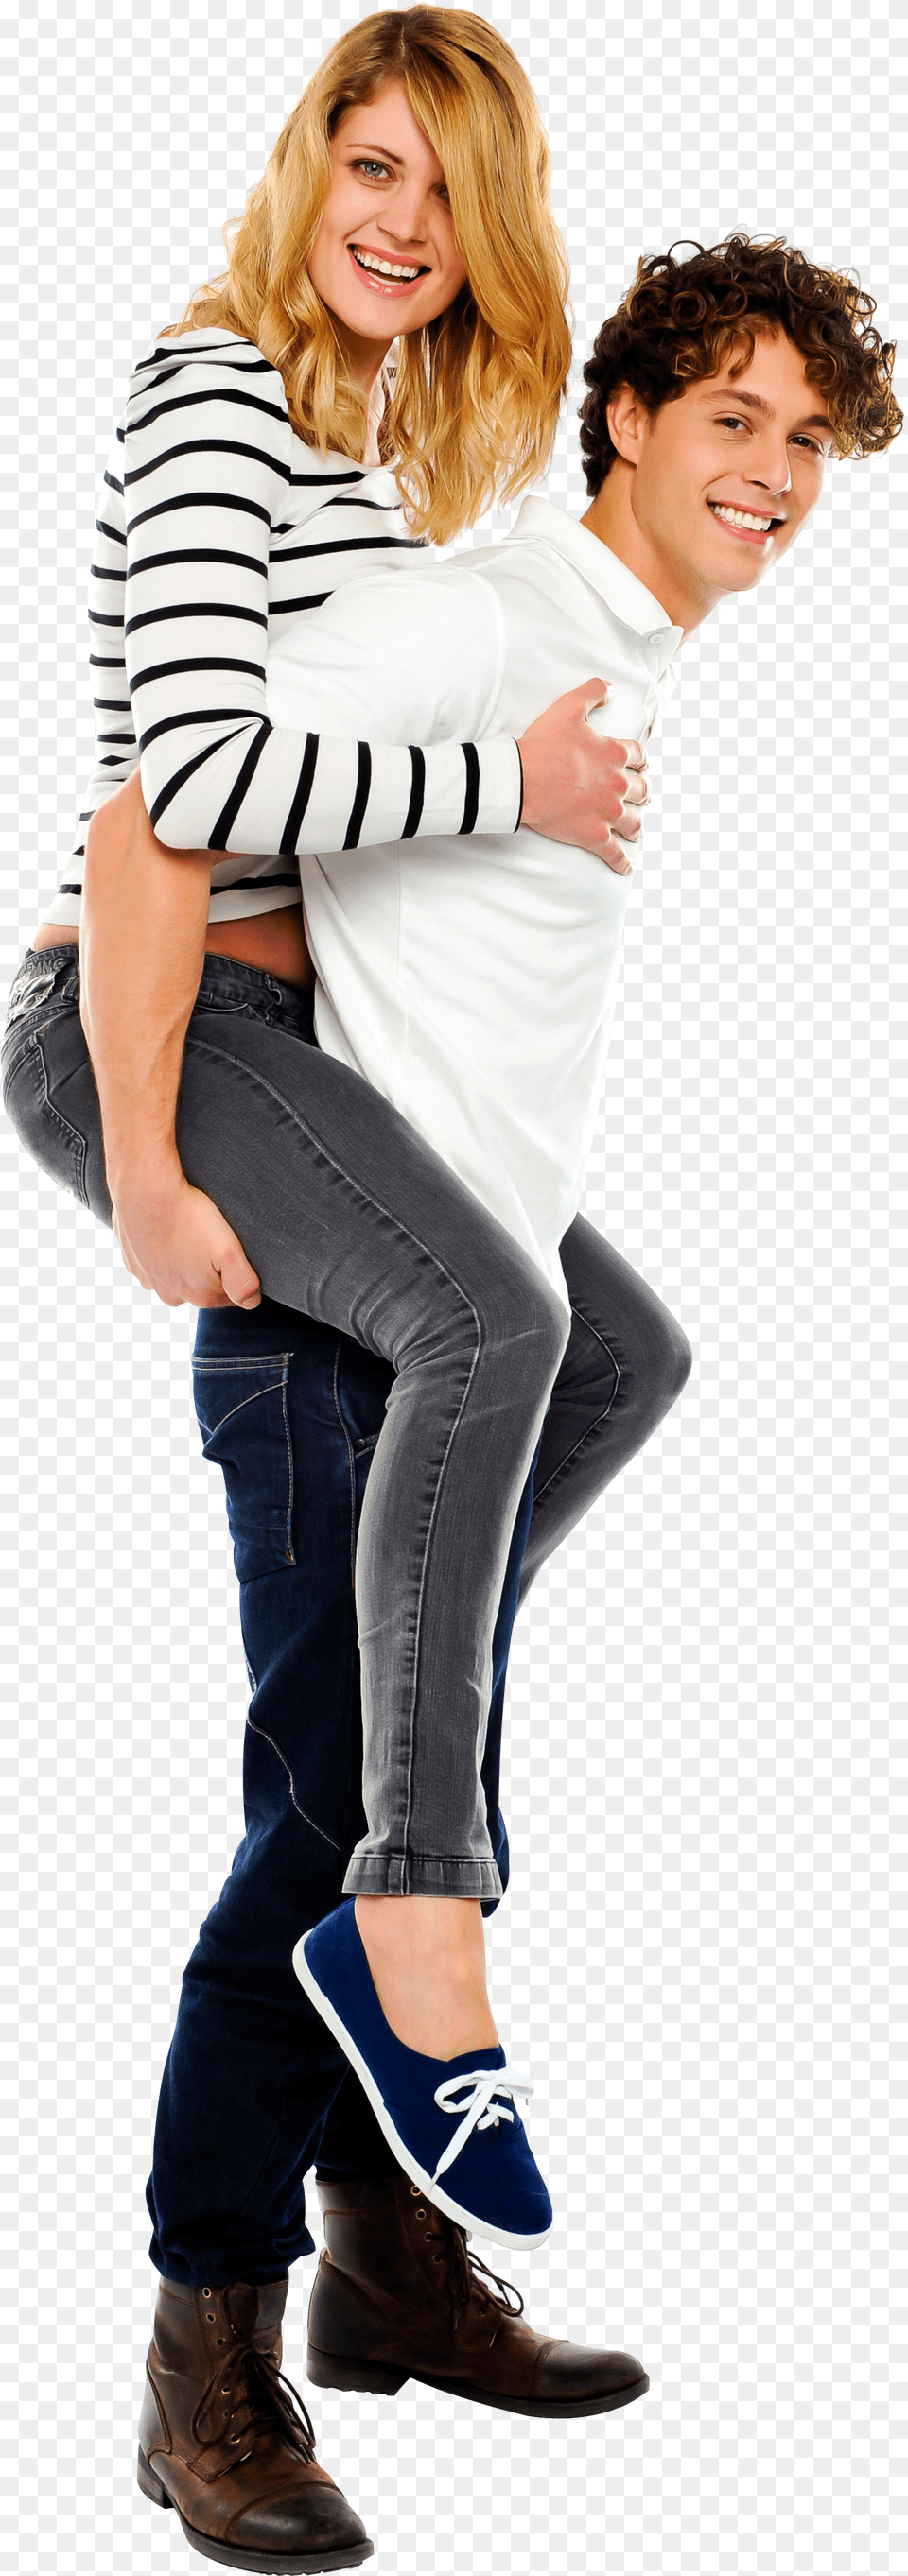 Love Couple Image For Portable Network Graphics Png